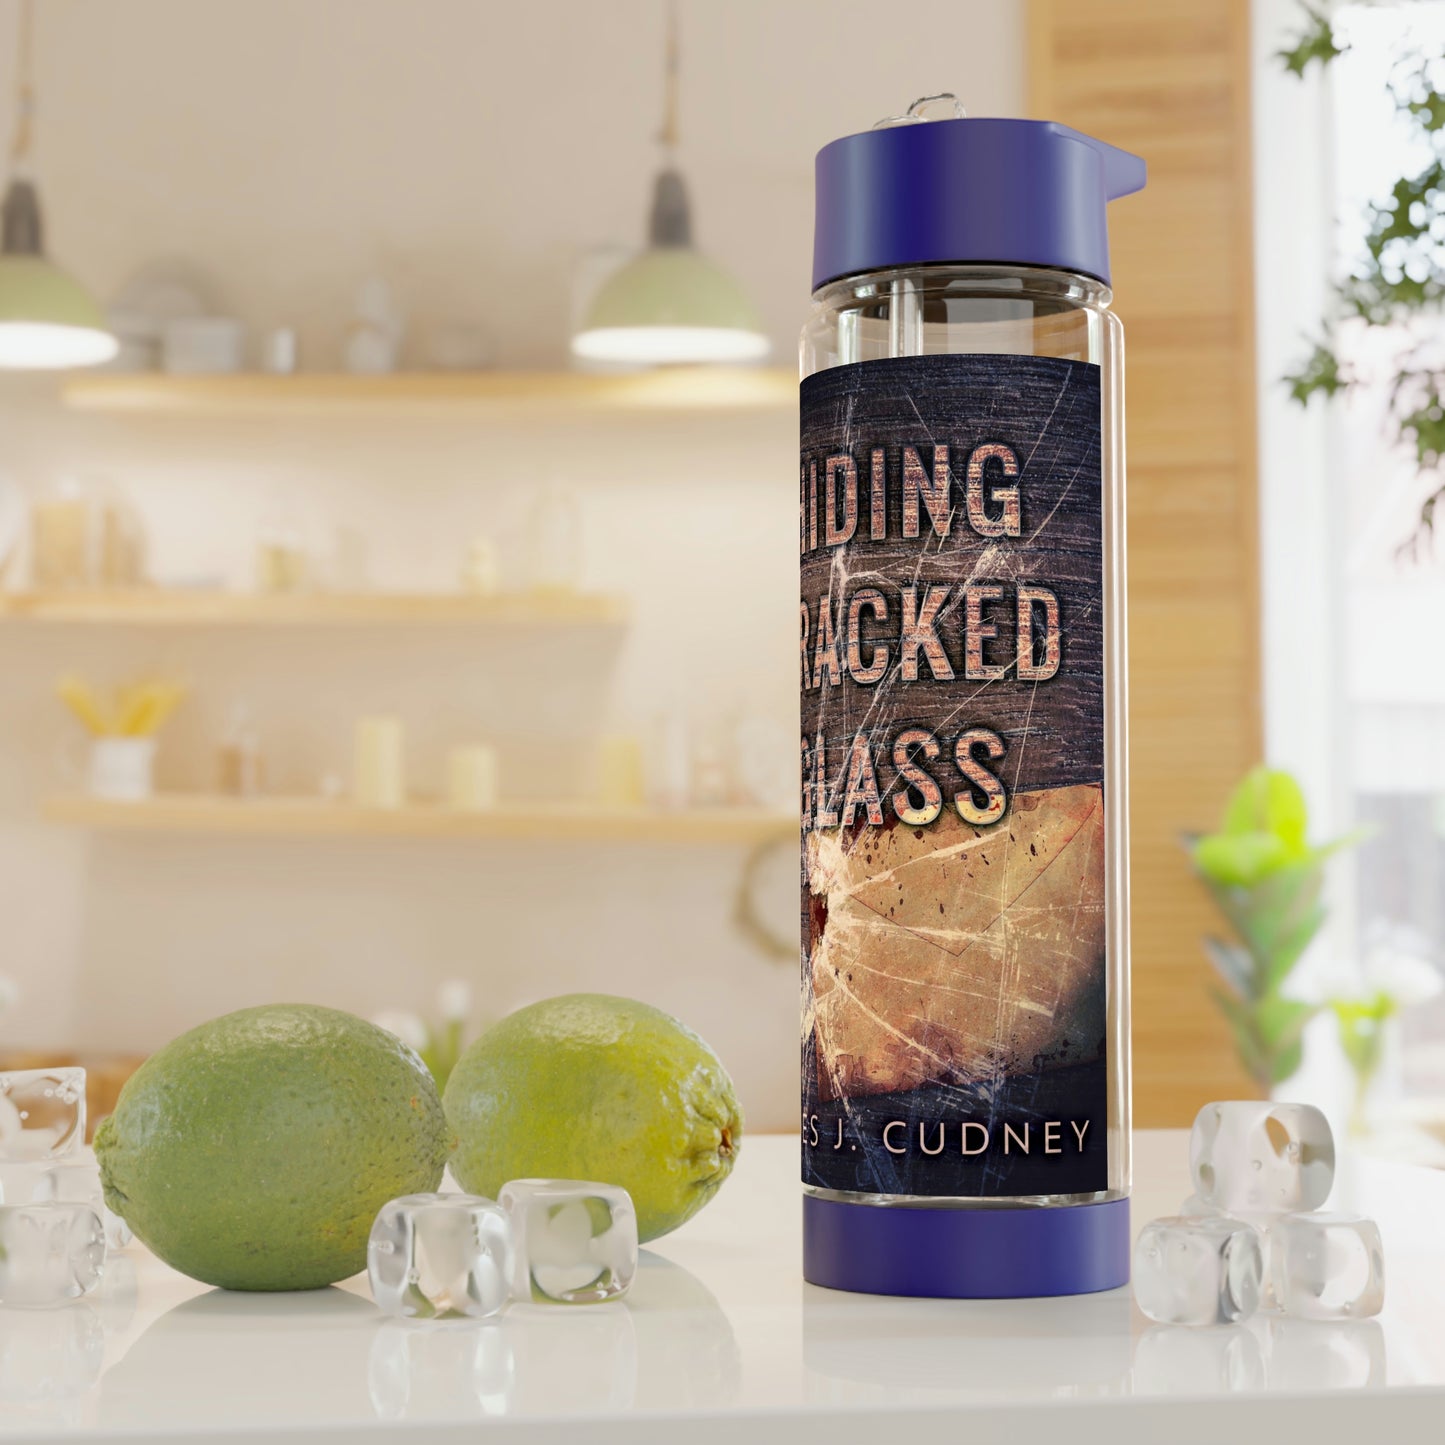 Hiding Cracked Glass - Infuser Water Bottle